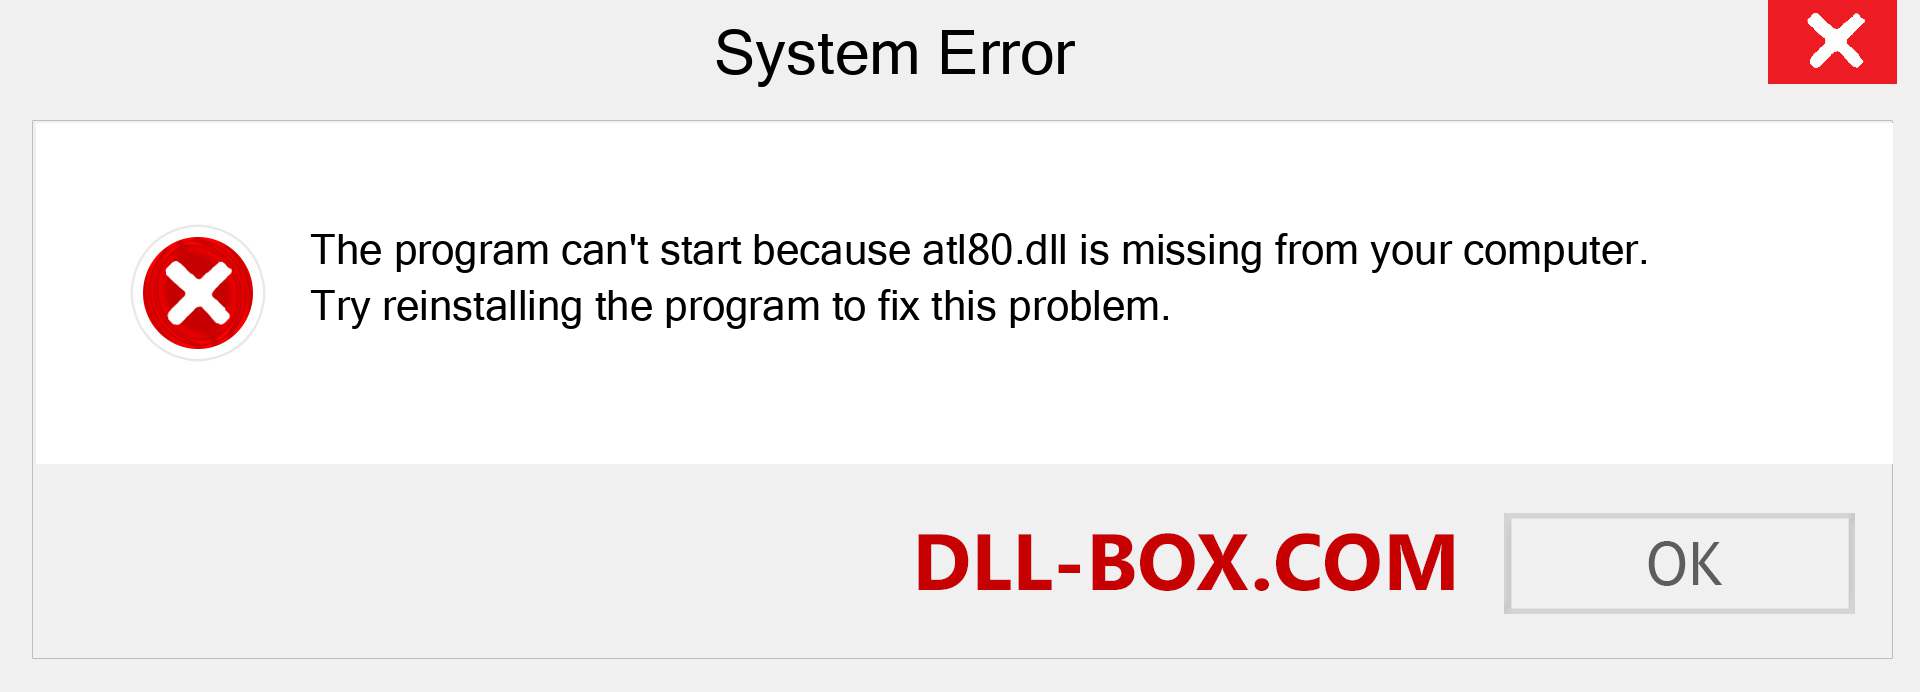  atl80.dll file is missing?. Download for Windows 7, 8, 10 - Fix  atl80 dll Missing Error on Windows, photos, images